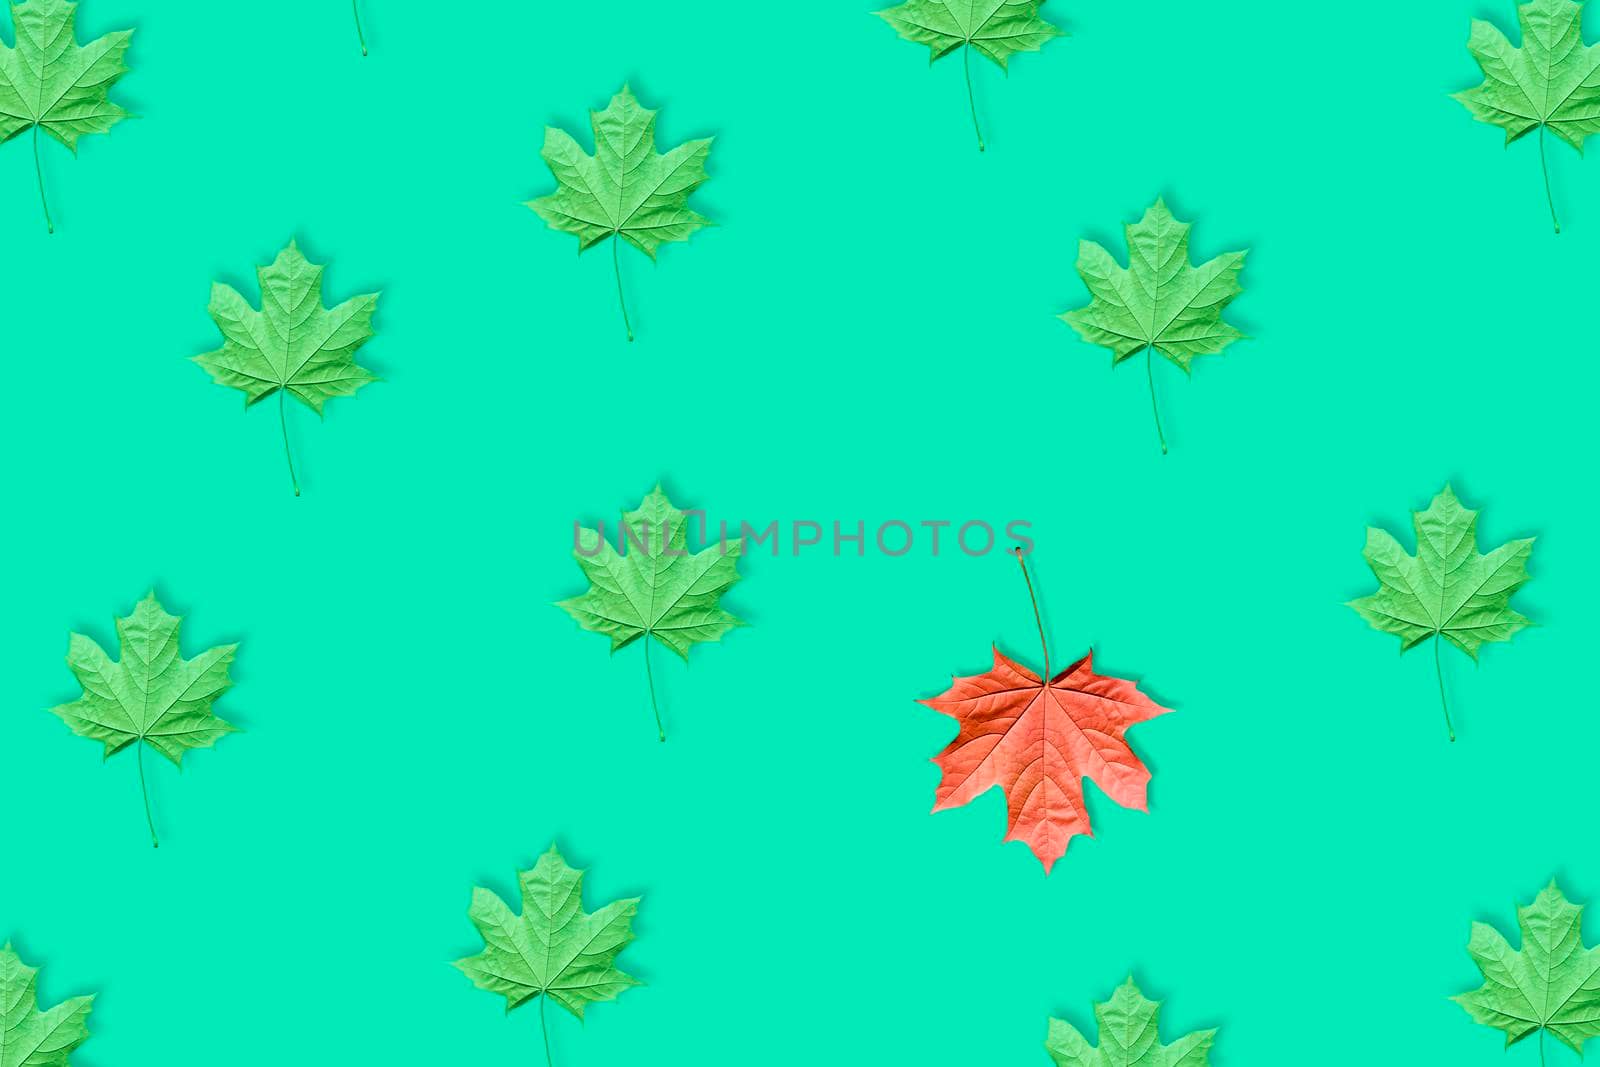 Unique red maple leaf among many green maple leaves pattern isolated on blue or mint background. Pop art design, creative fall concept. Standing out from crowd, individuality and difference concept.